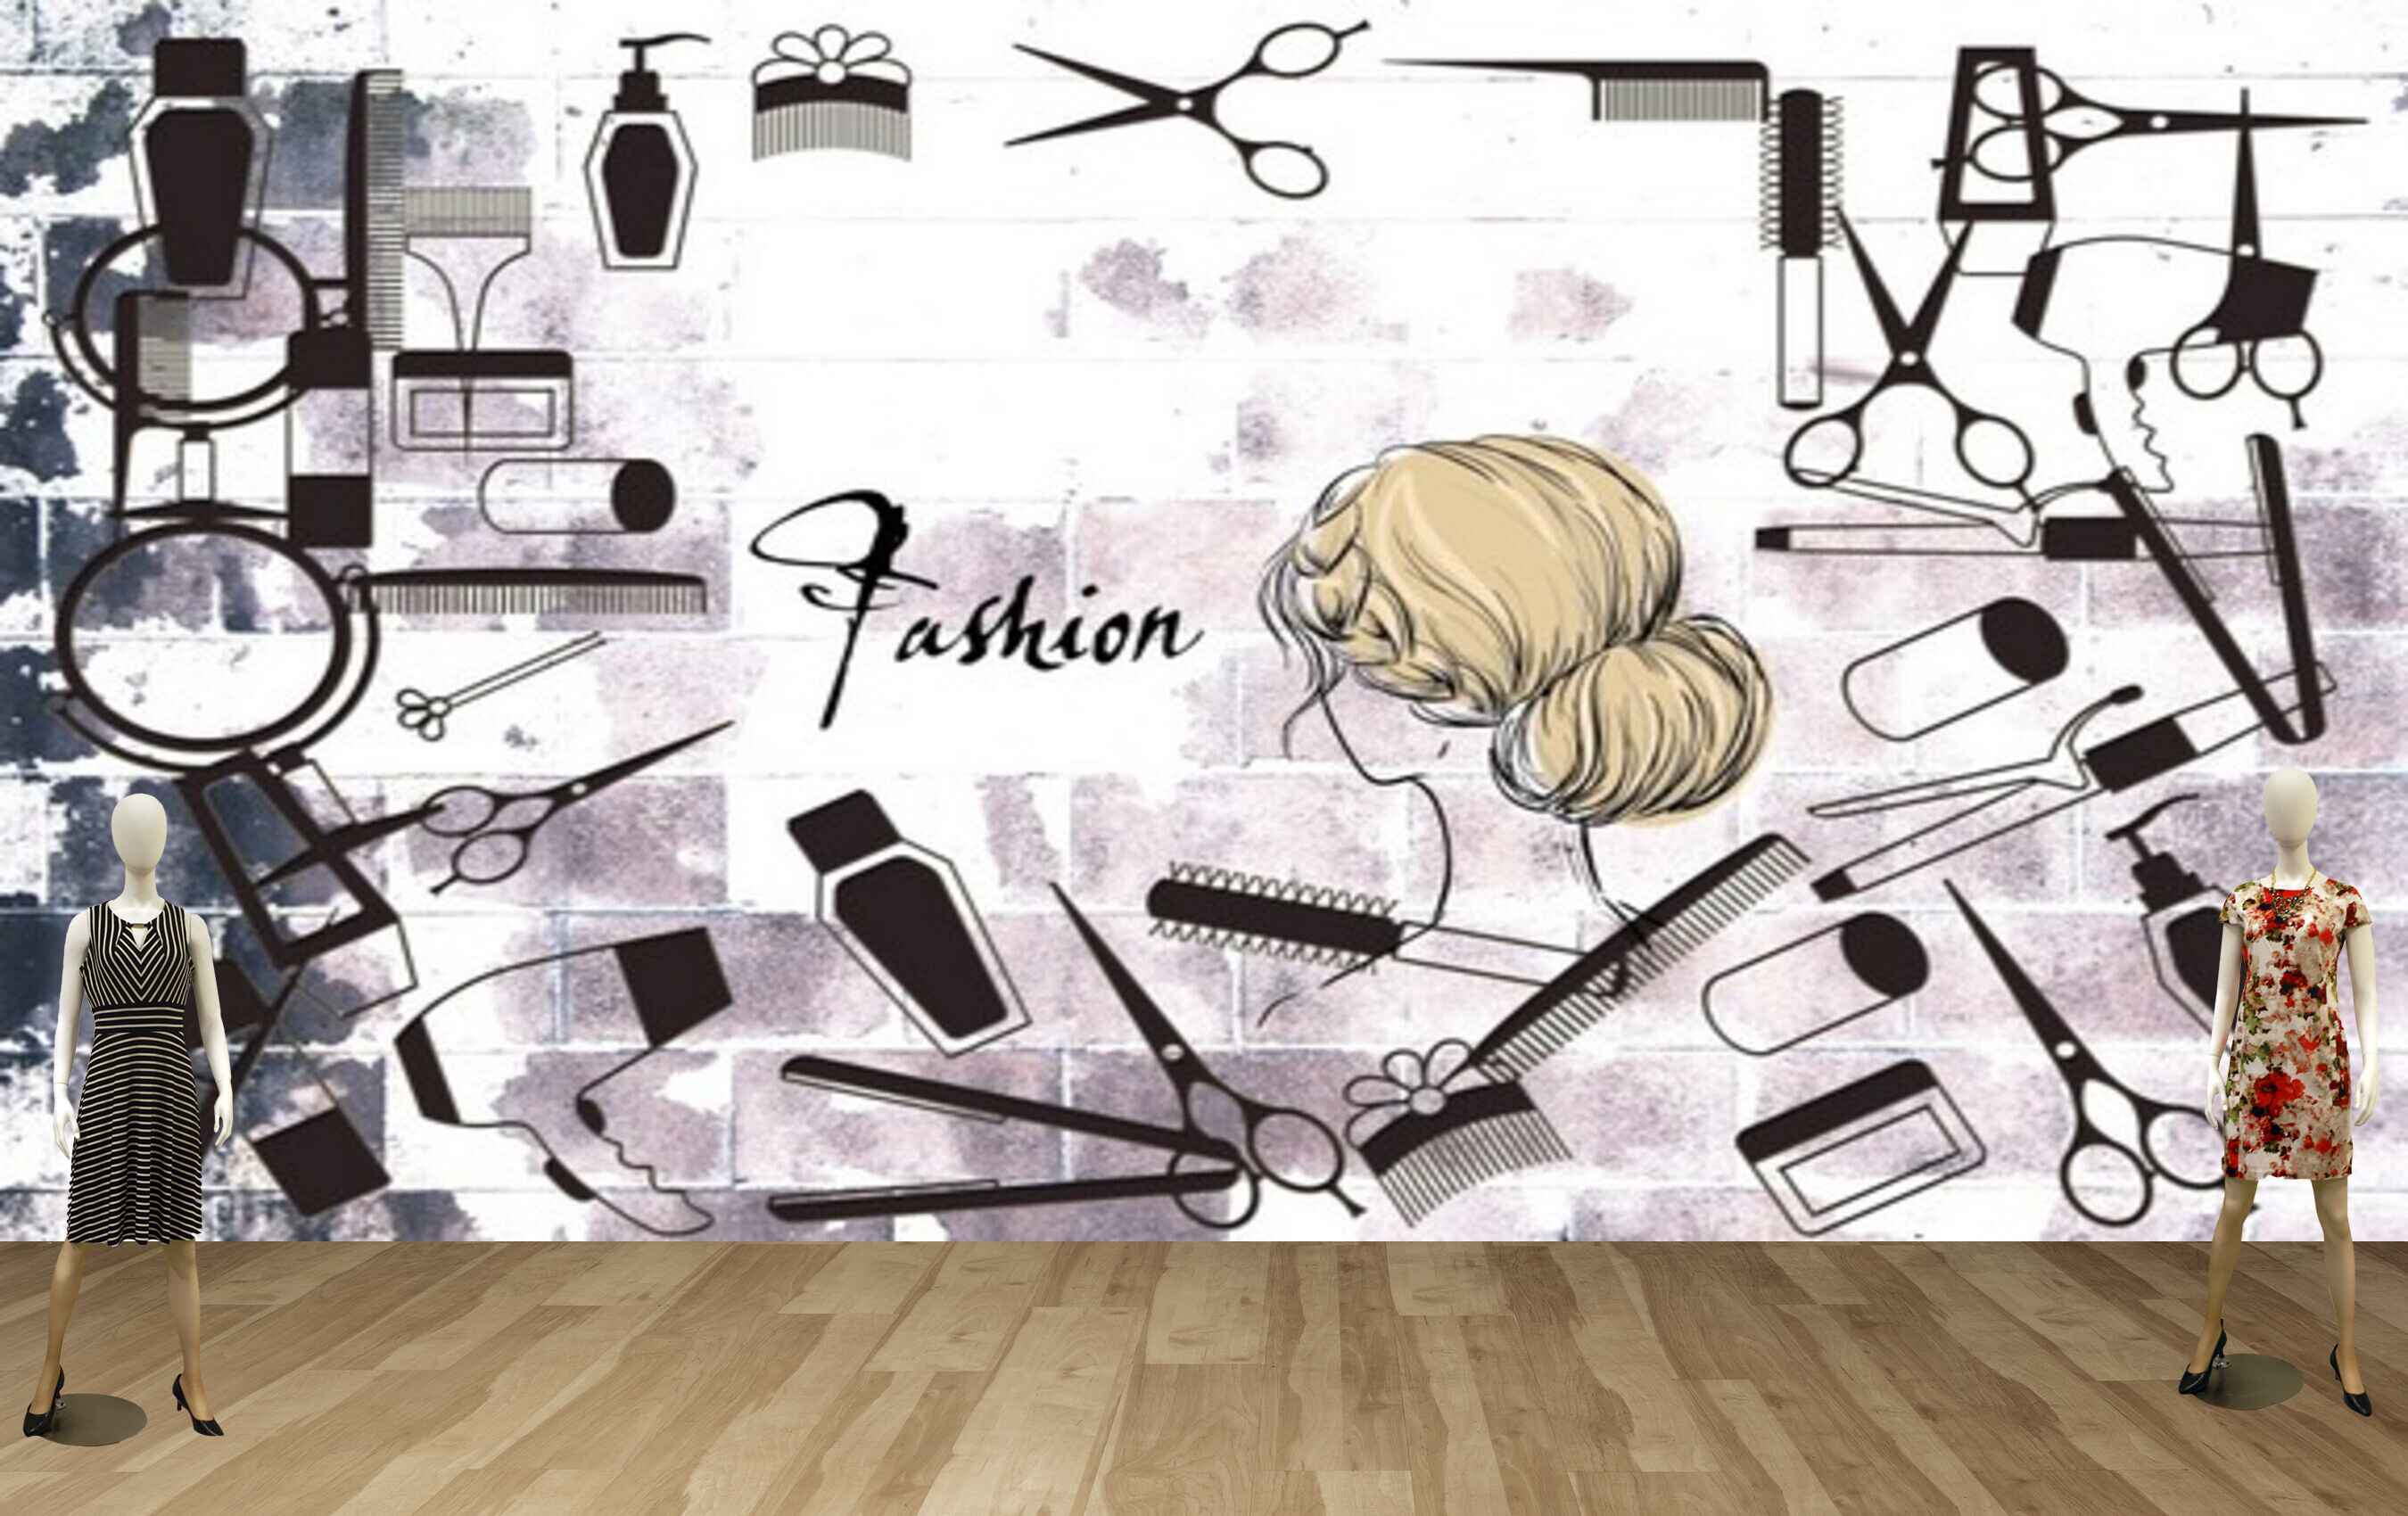 Avikalp MWZ3565 Fashion Girls Hair Styles Scissors Products HD Wallpaper for Fashion Boutique